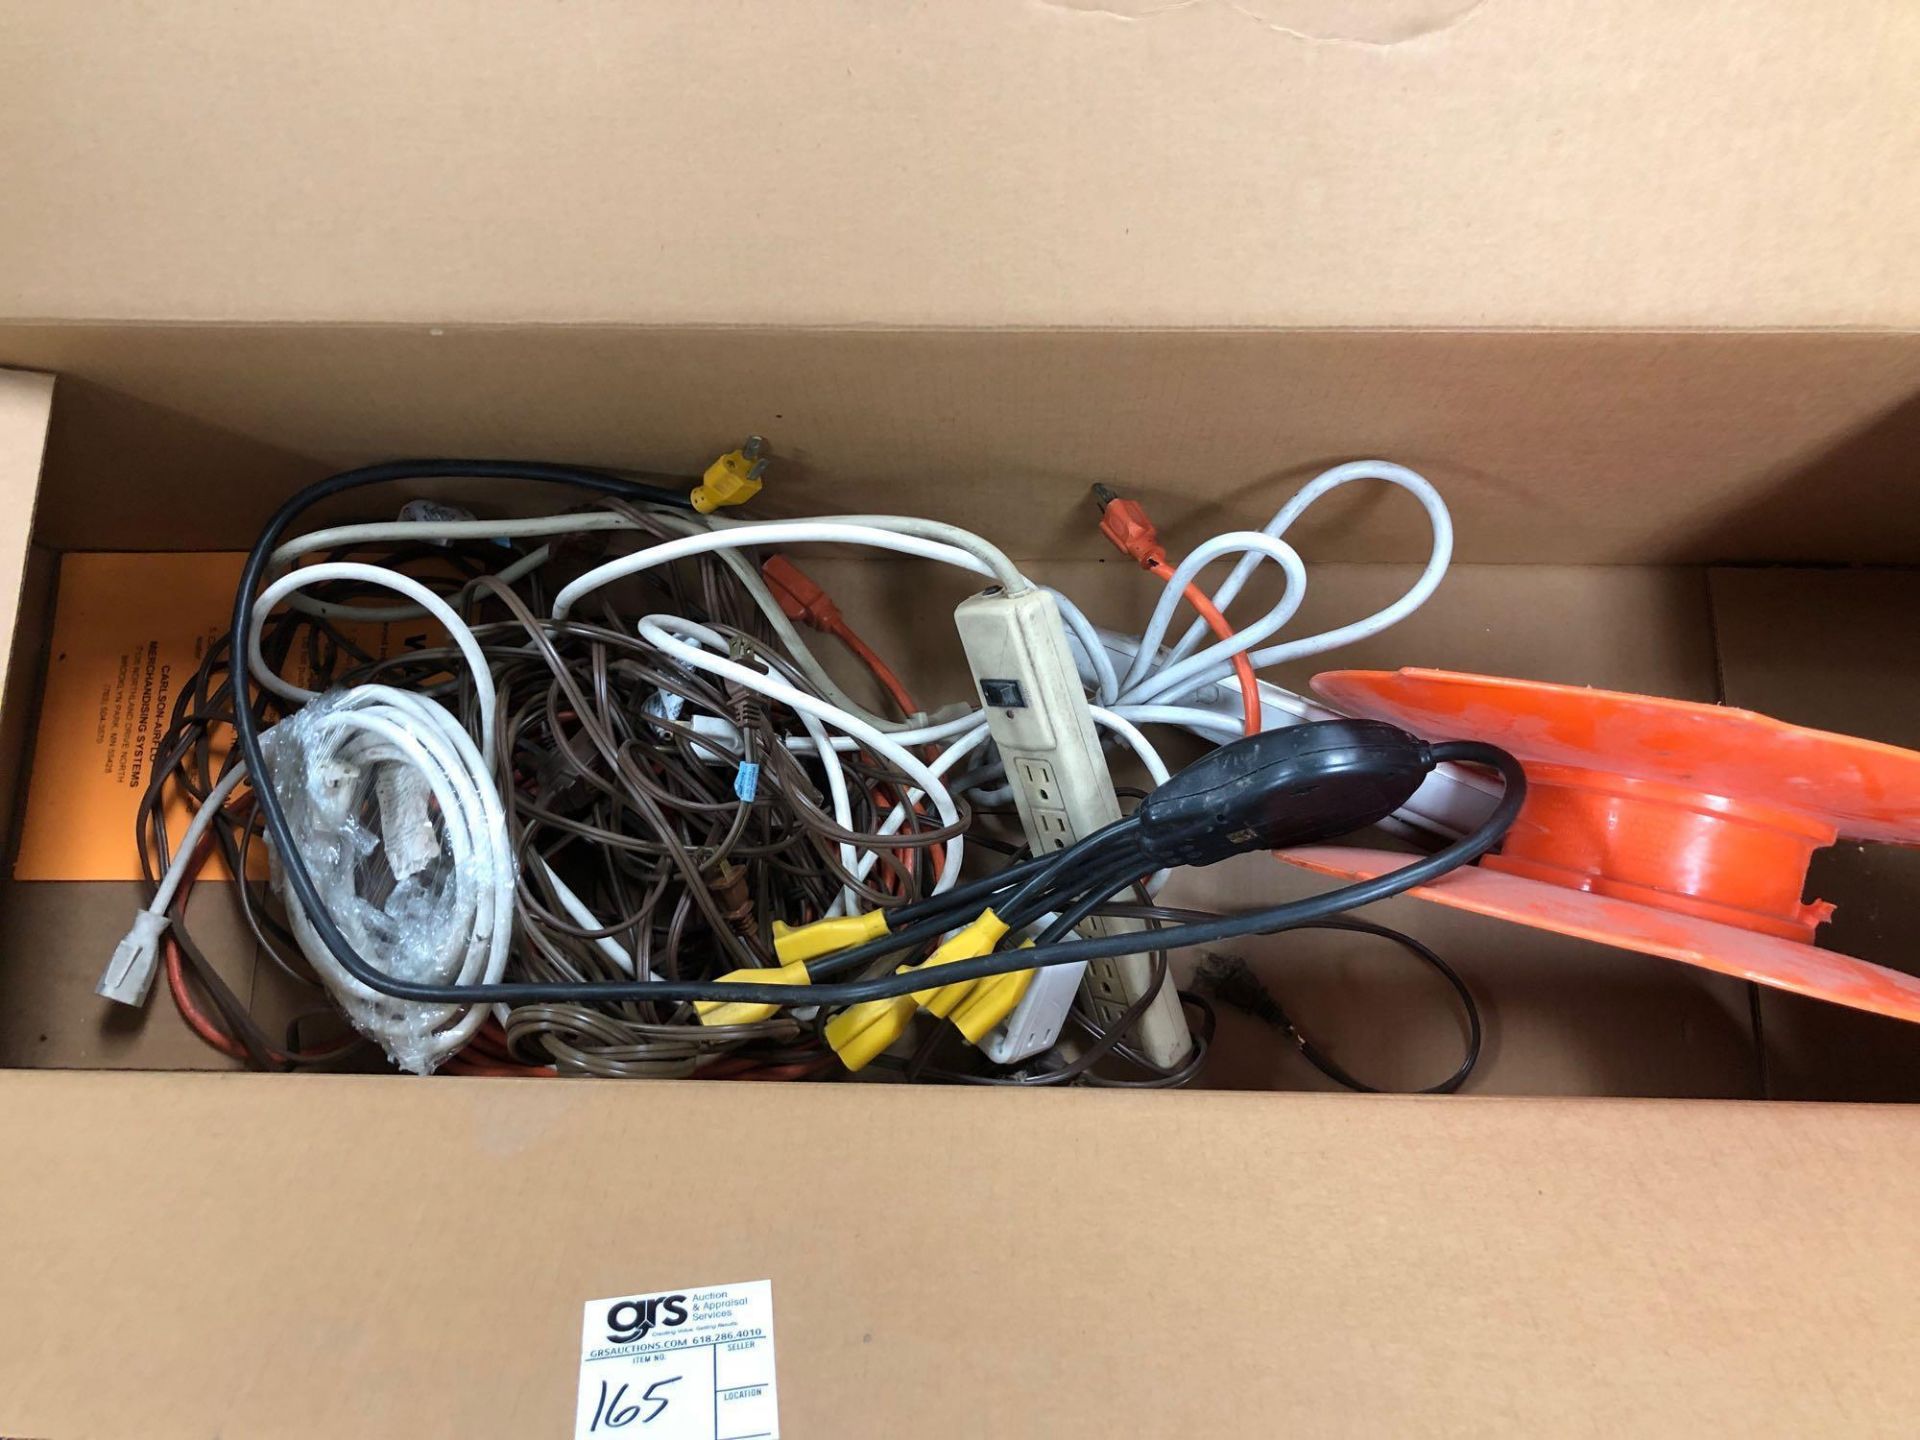 Box of Extension Cords and Surge Protectors